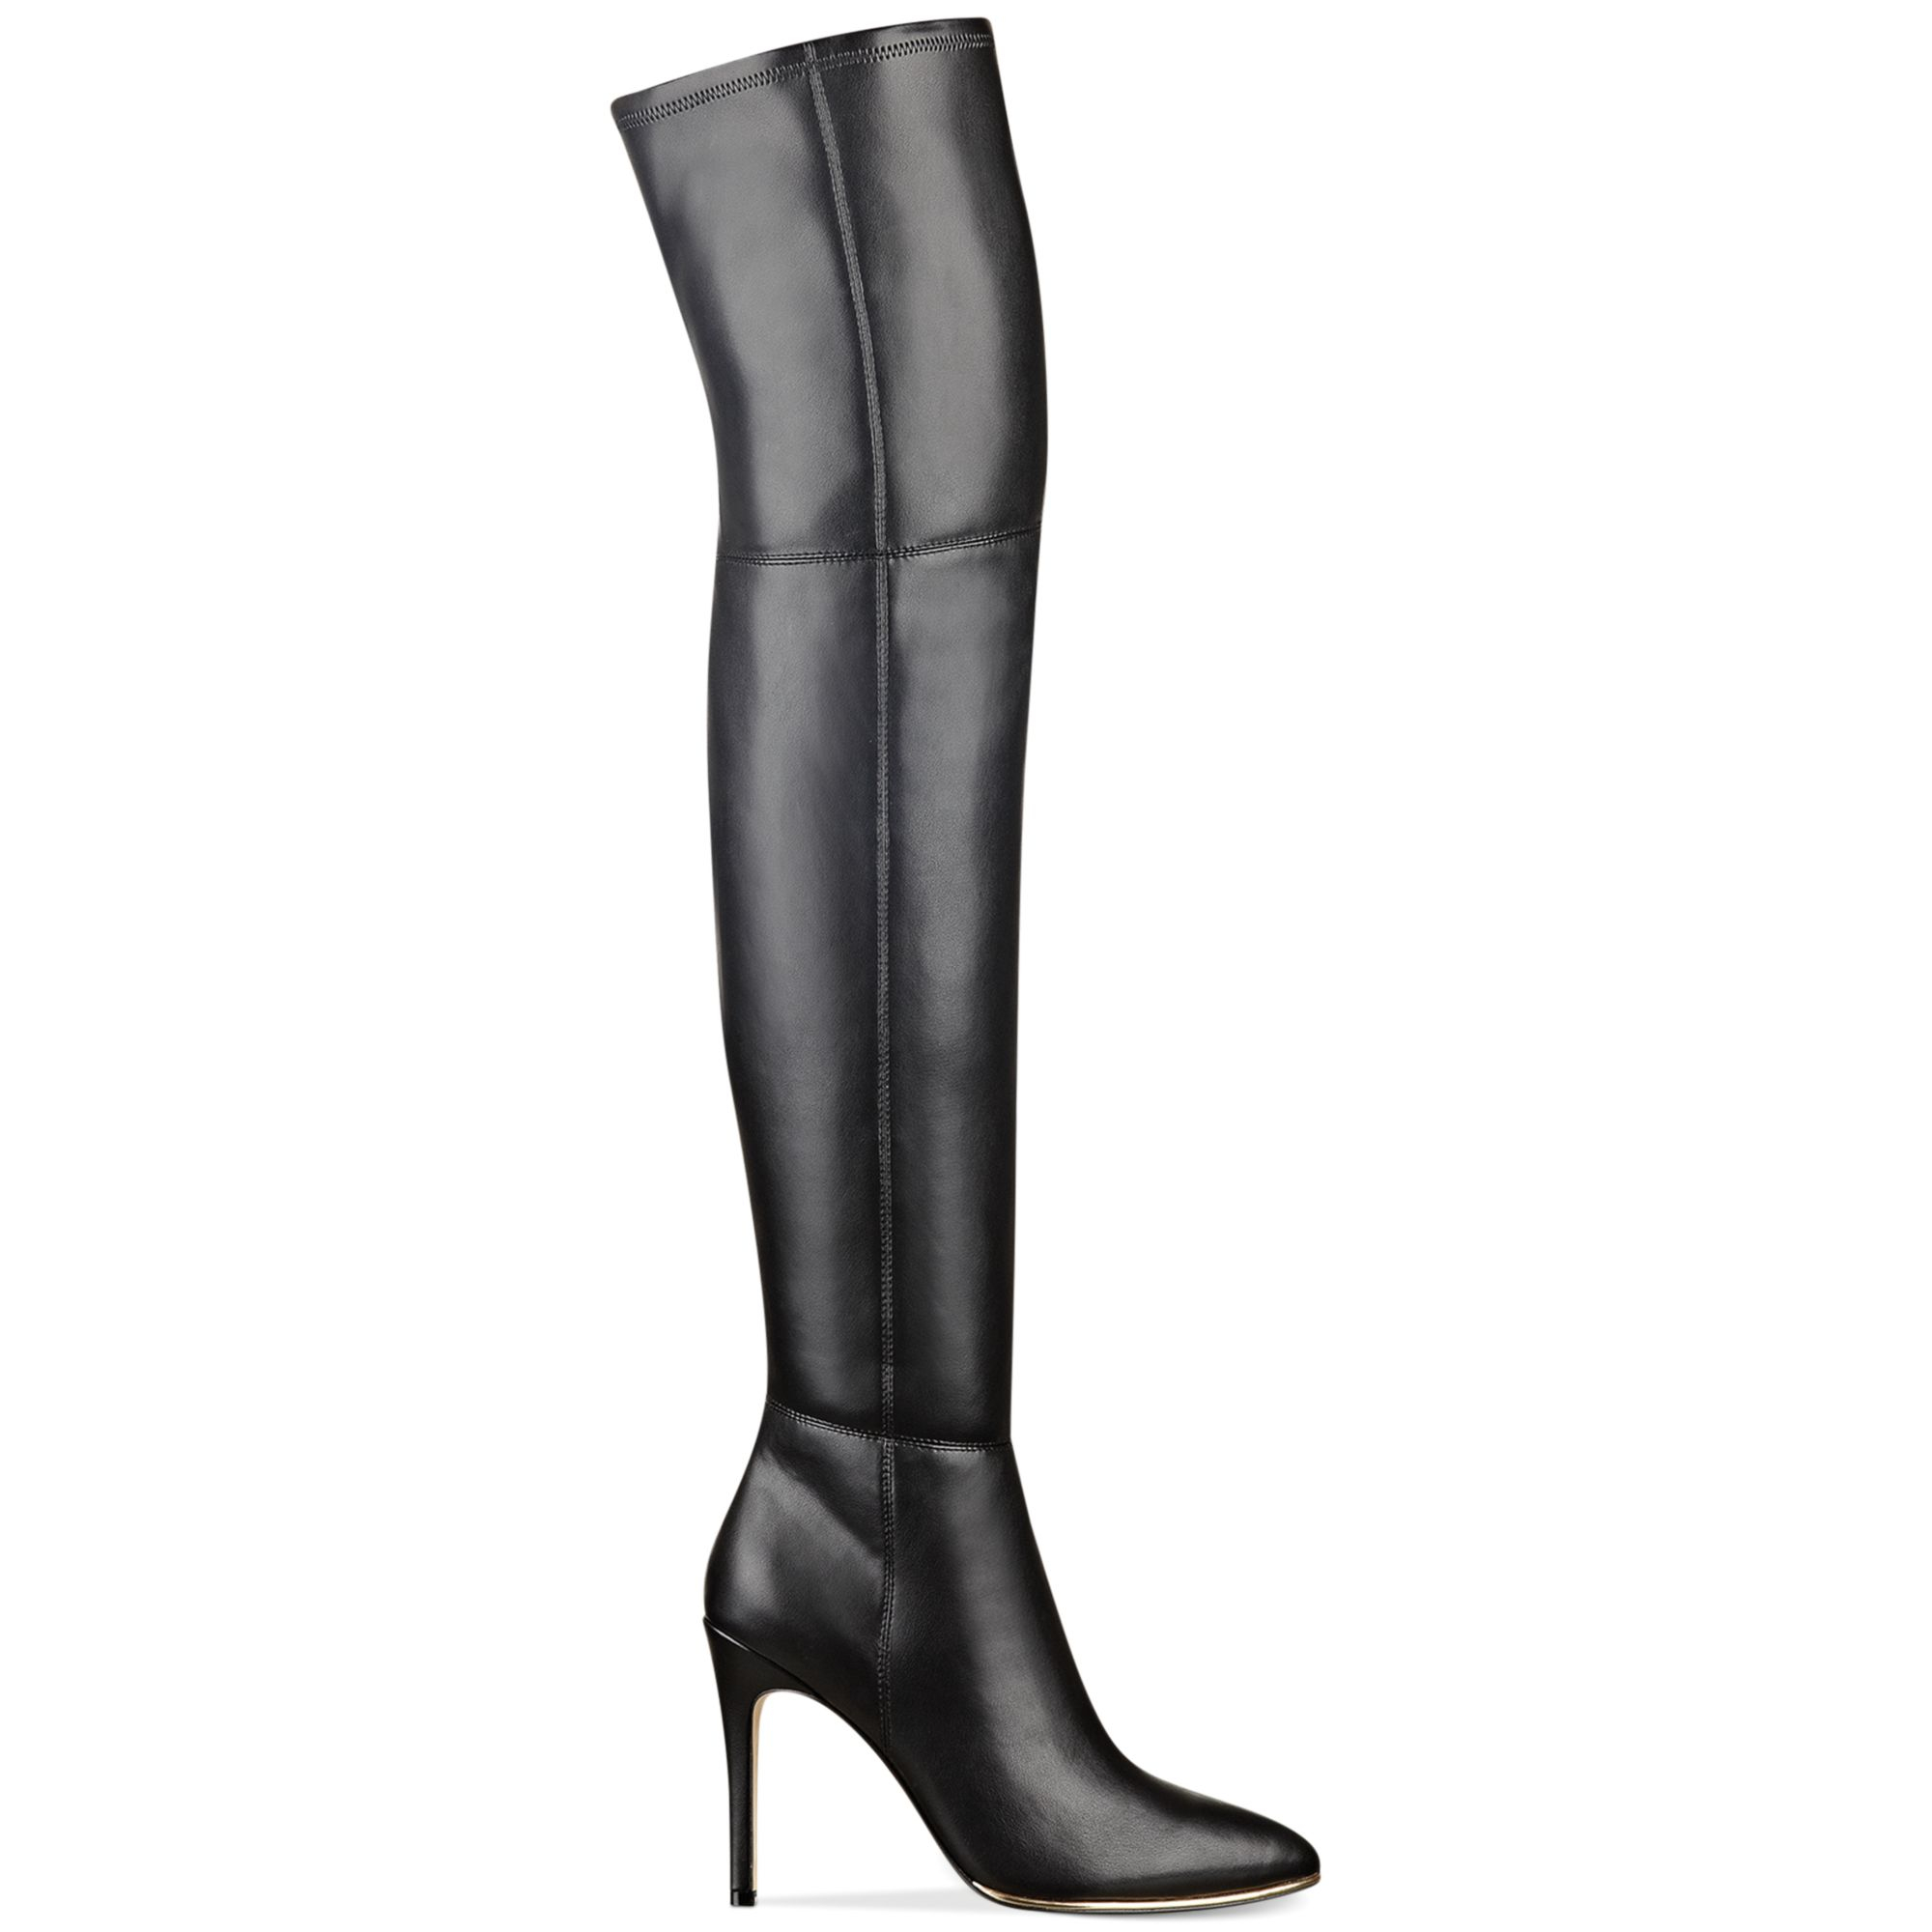 Lyst Guess Womens Zonian Over The Knee Boots in Black